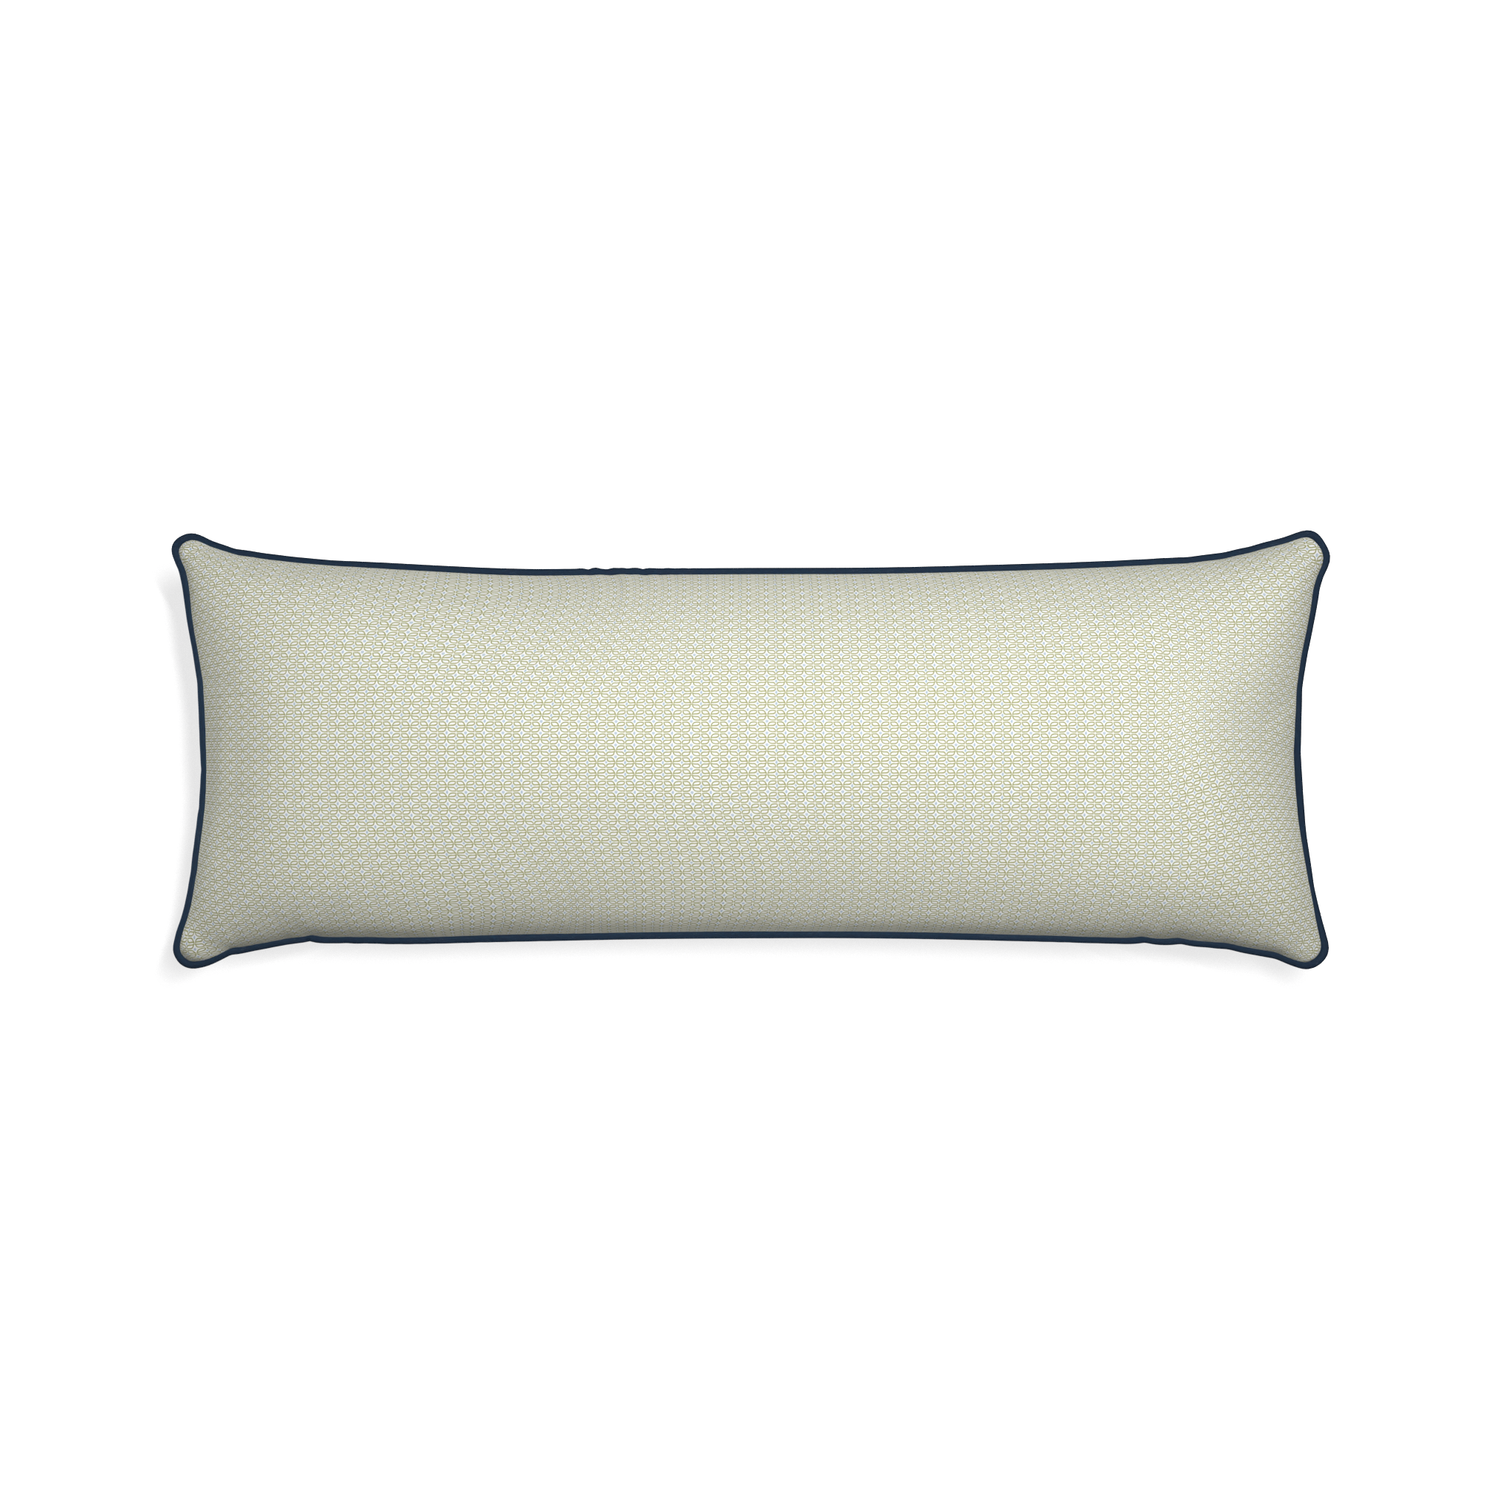 Xl-lumbar loomi moss custom moss green geometricpillow with c piping on white background